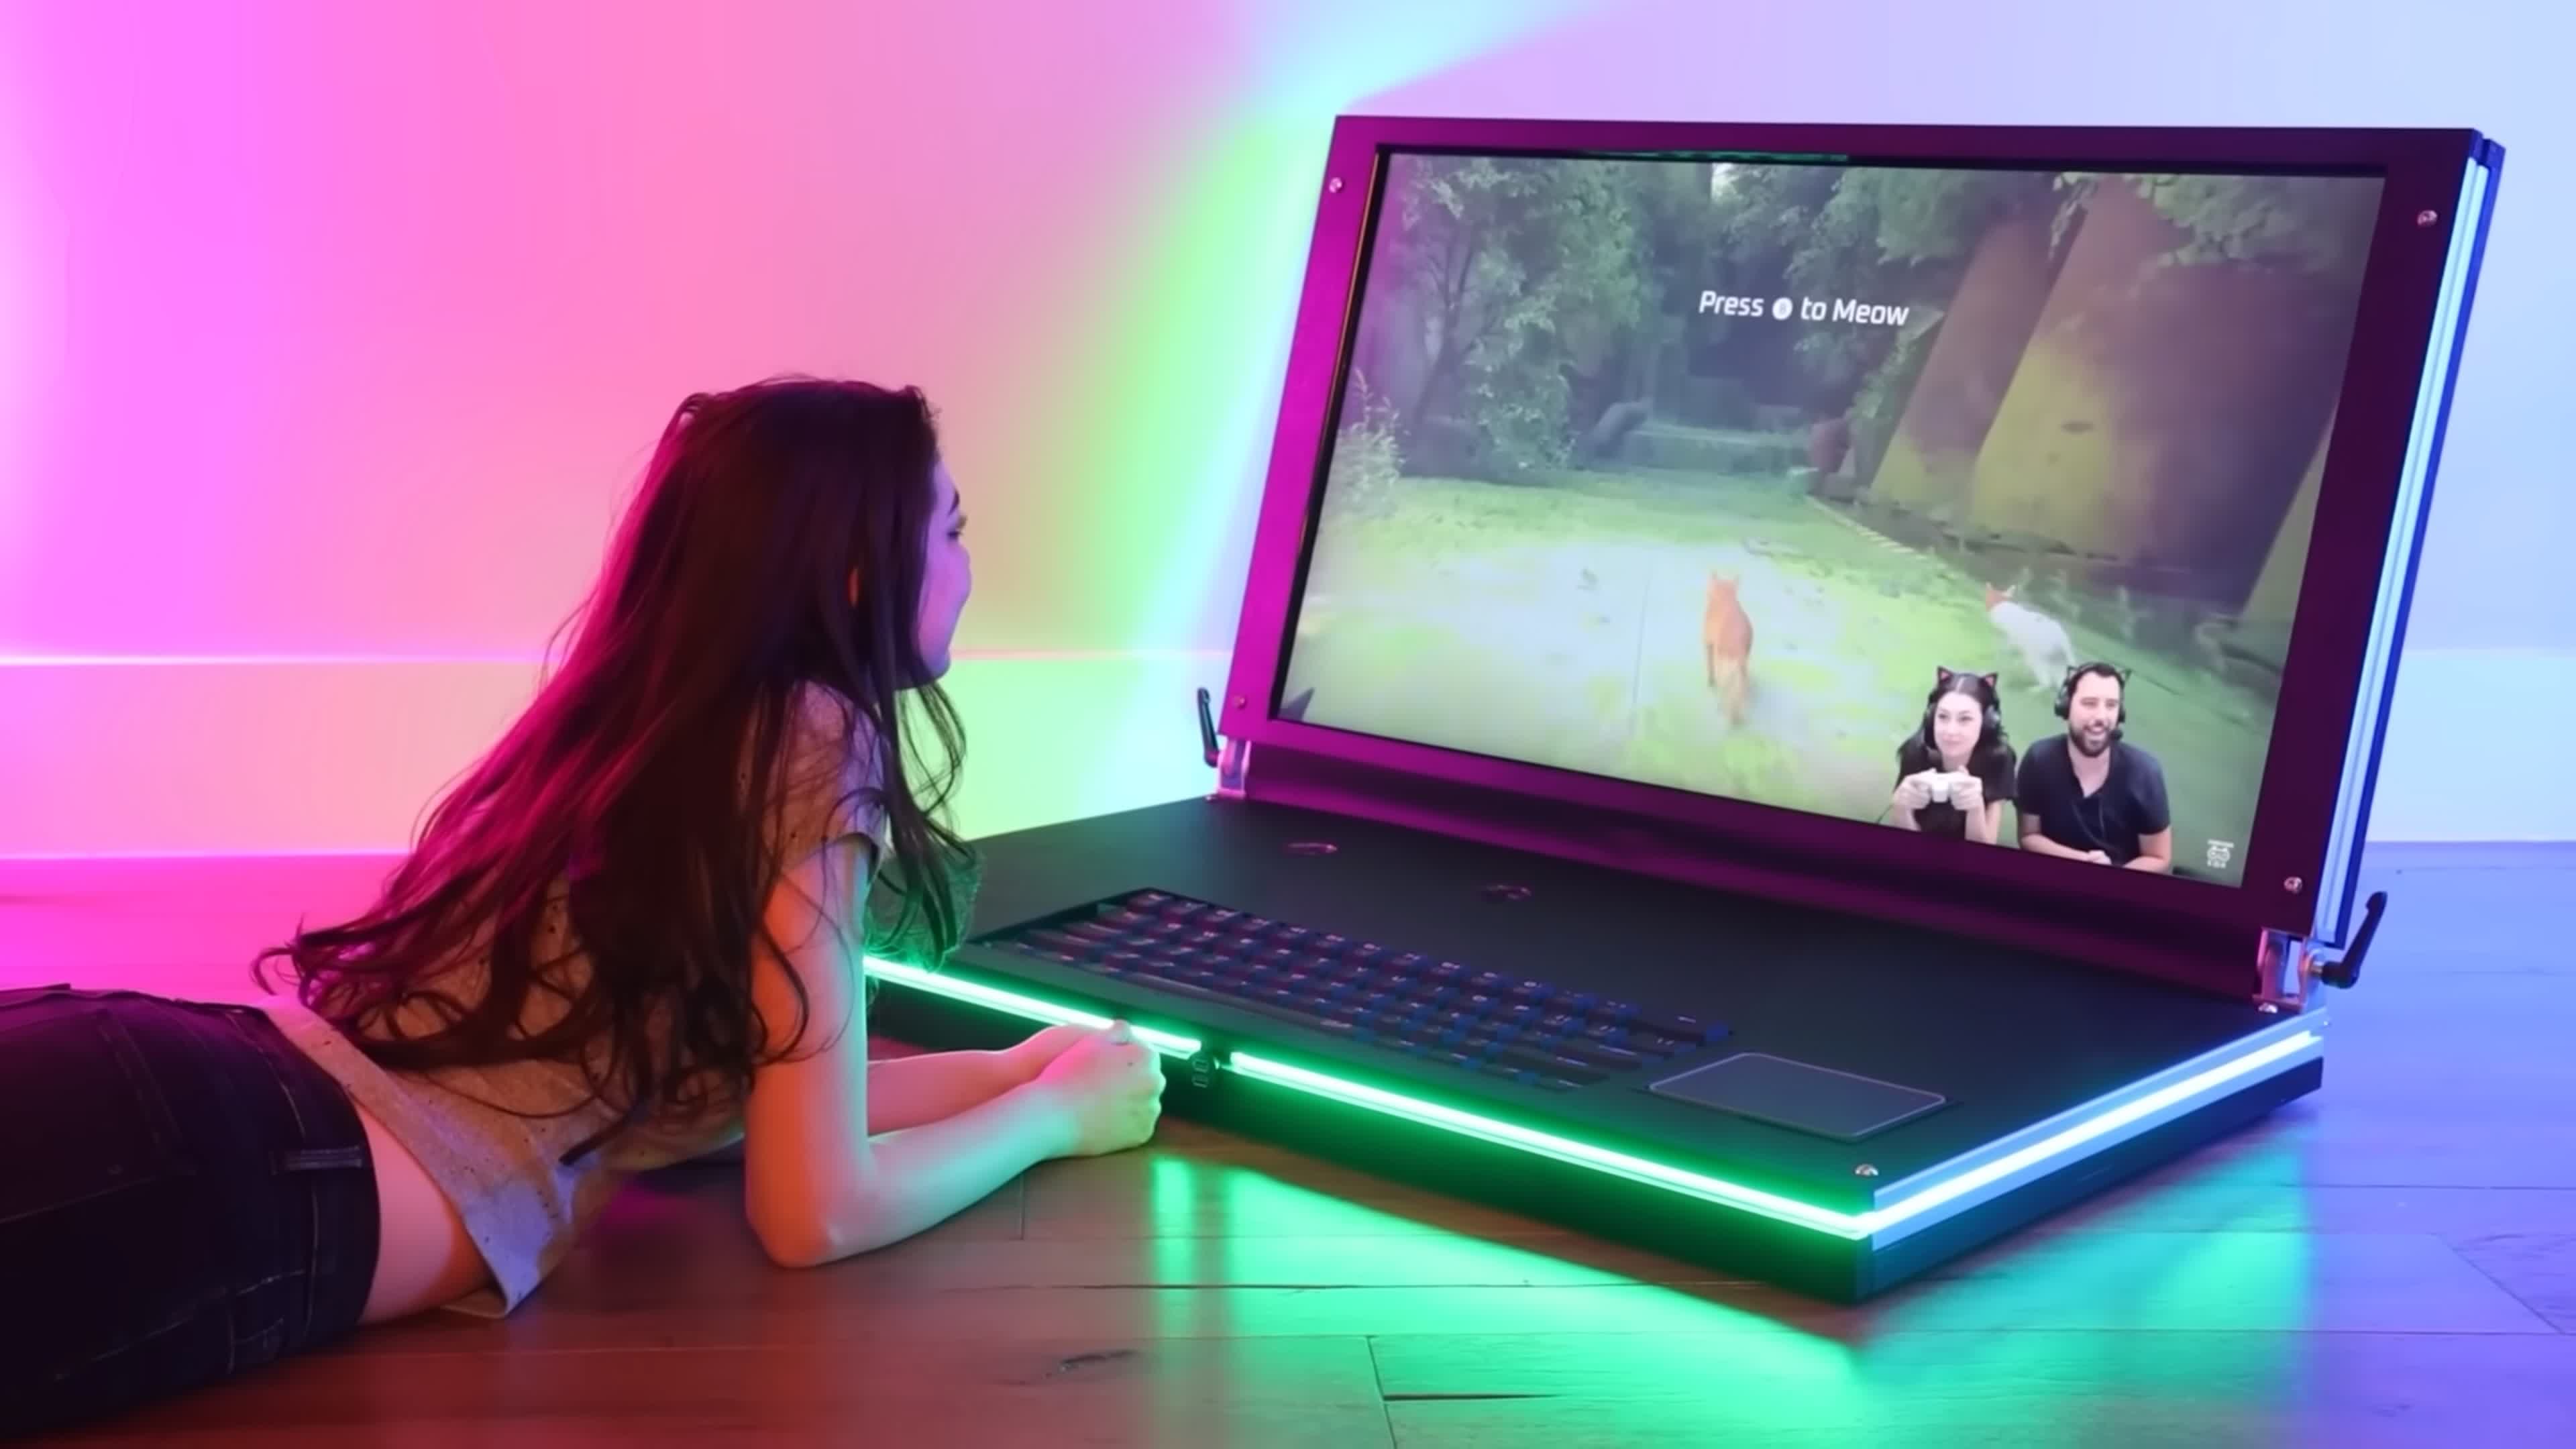 YouTubers' 43-inch gaming laptop is powered by an Intel NUC